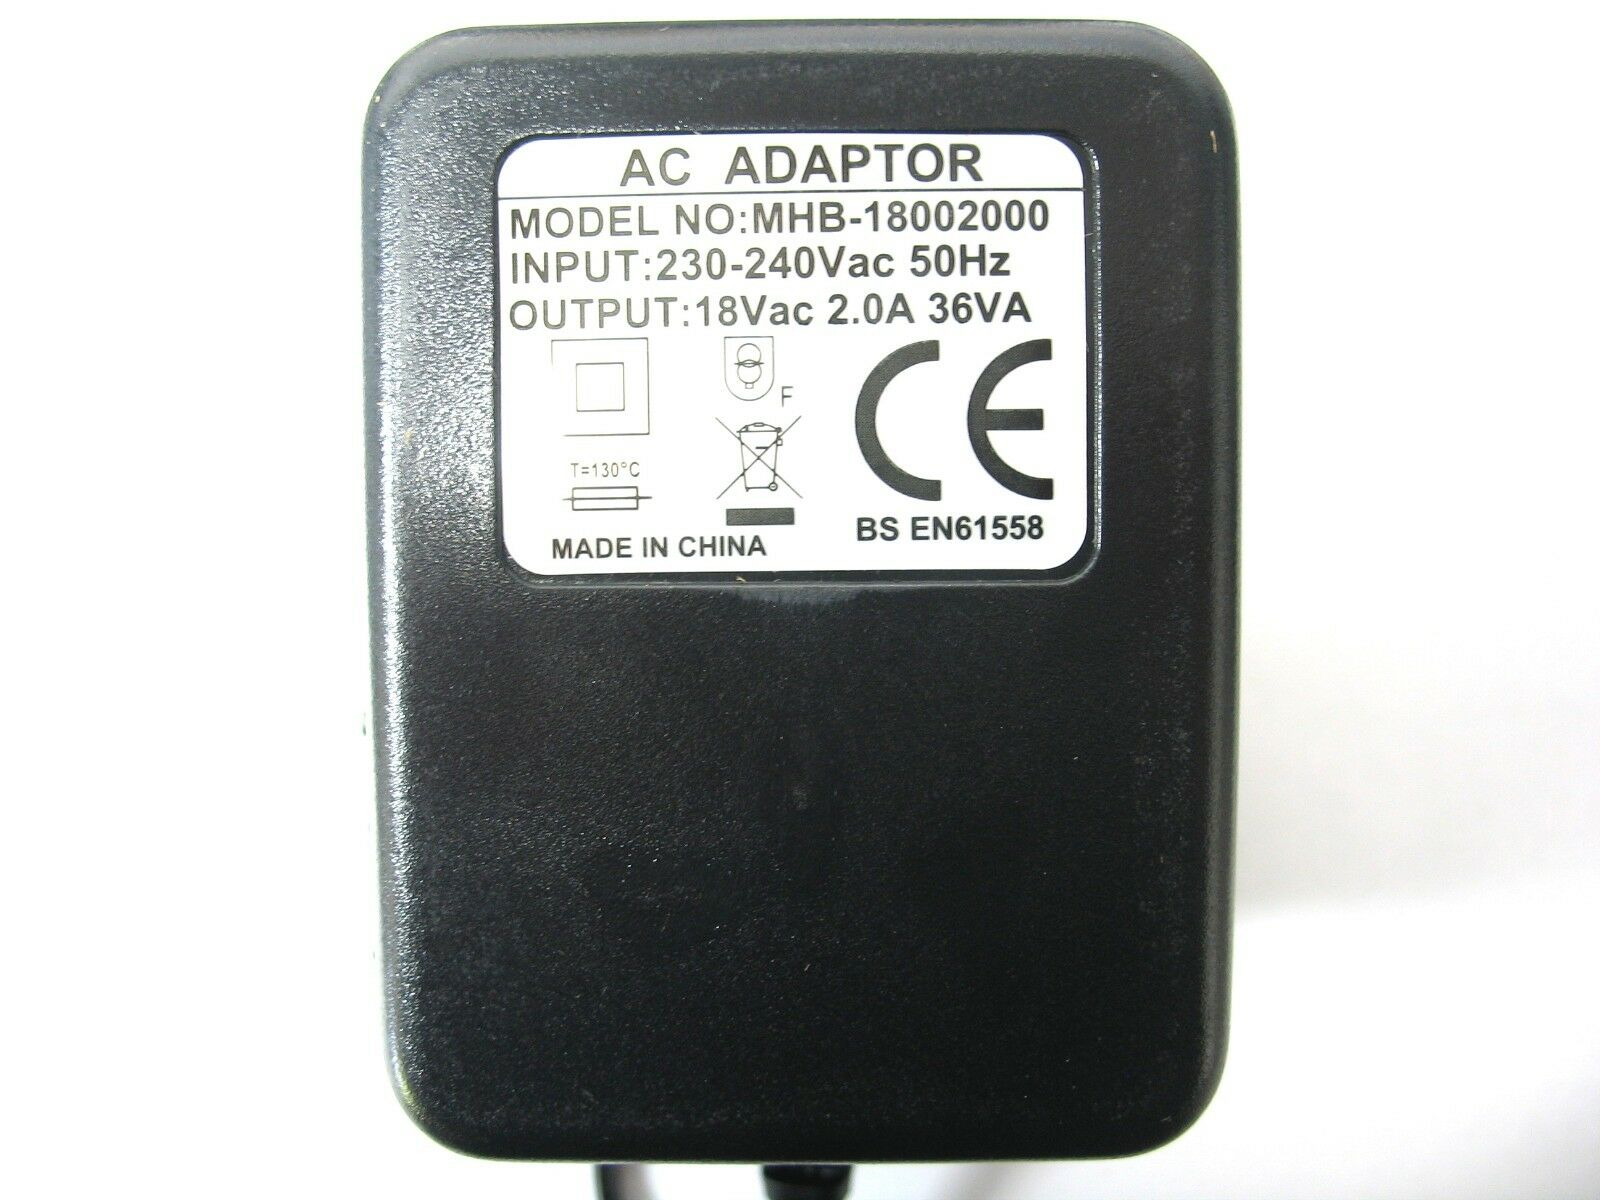 2A 2000MA 18V 36VA AC/AC OUTPUT MAINS POWER ADAPTOR/SUPPLY/CHARGER/TRANSFORMER Manufacturer Warranty: 1 year Sub-Typ